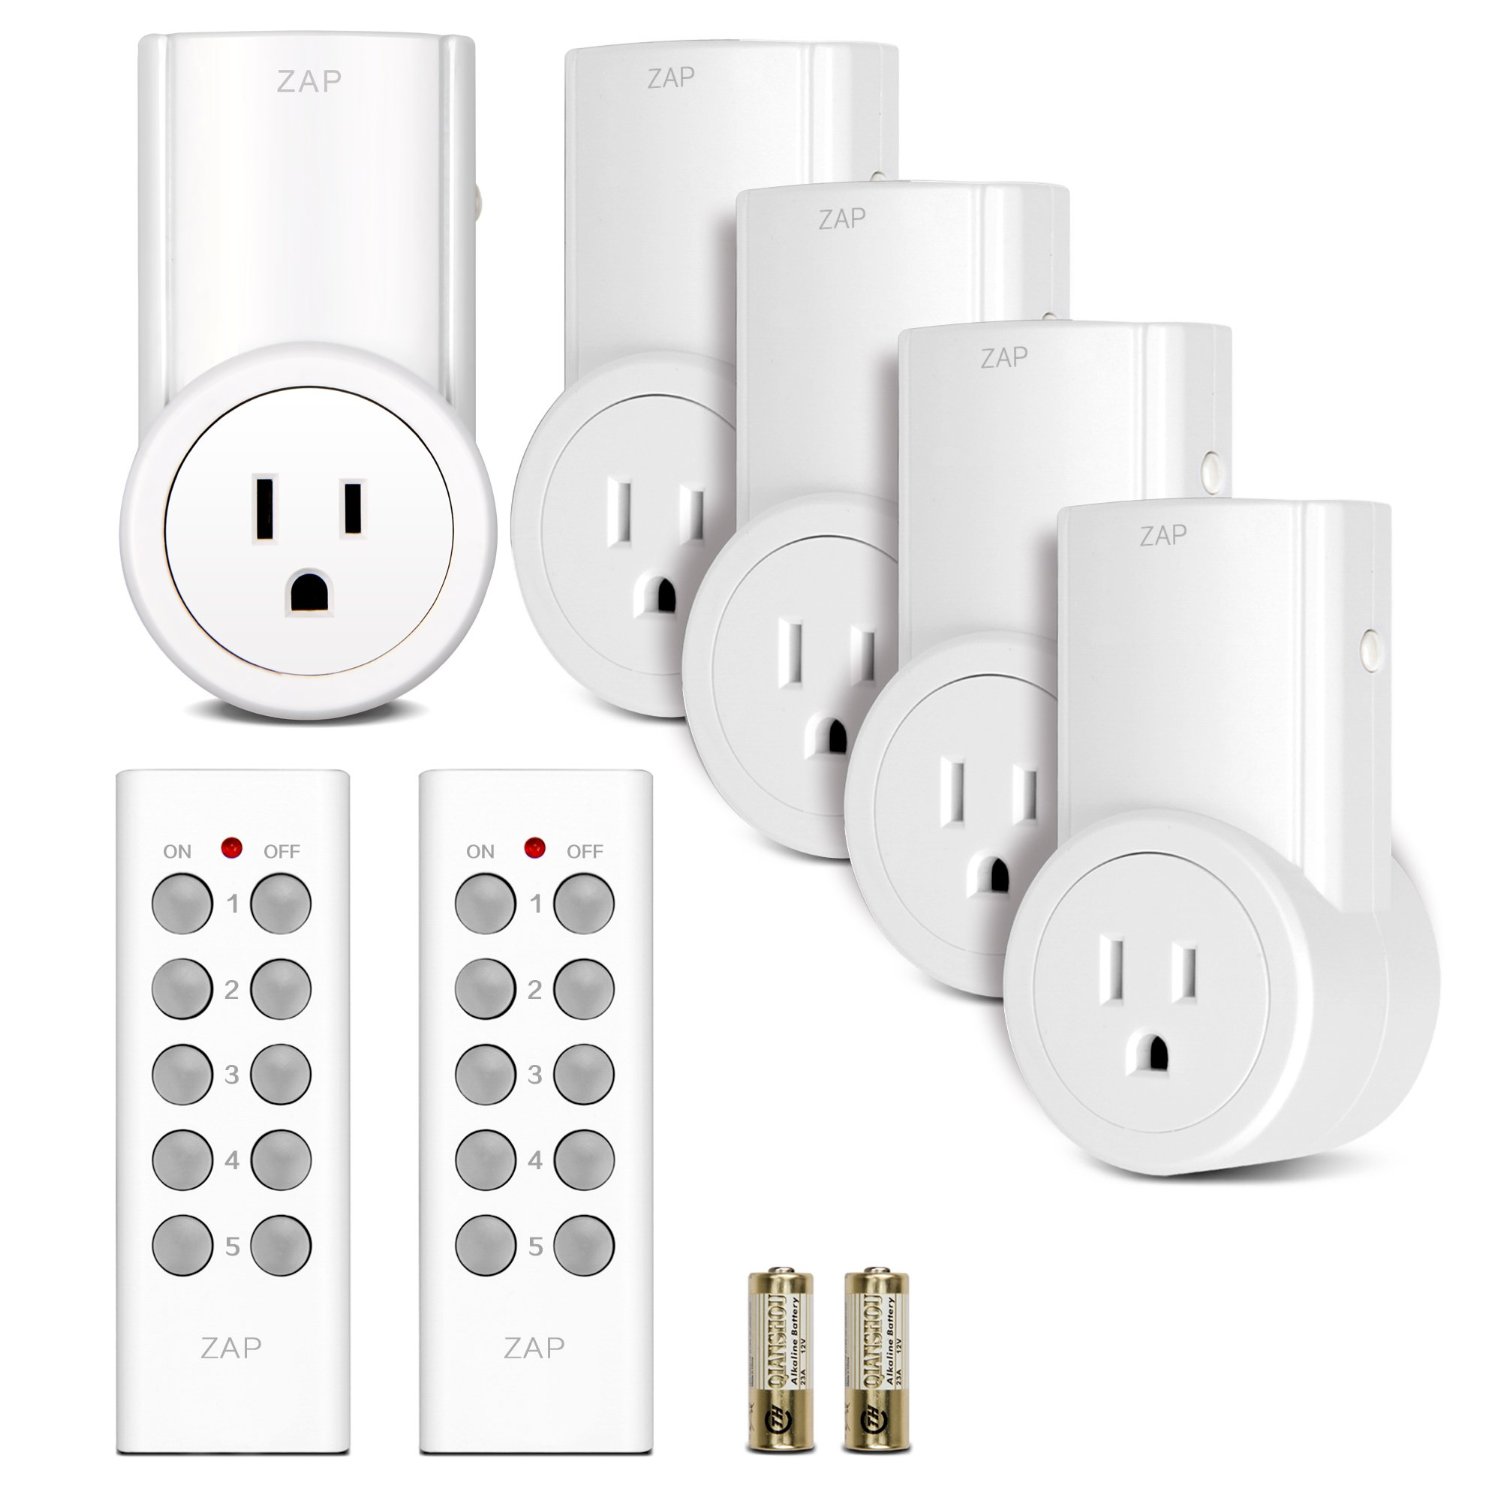 Get 5 Etekcity Remote Control Outlet Switches For Only $21.48!